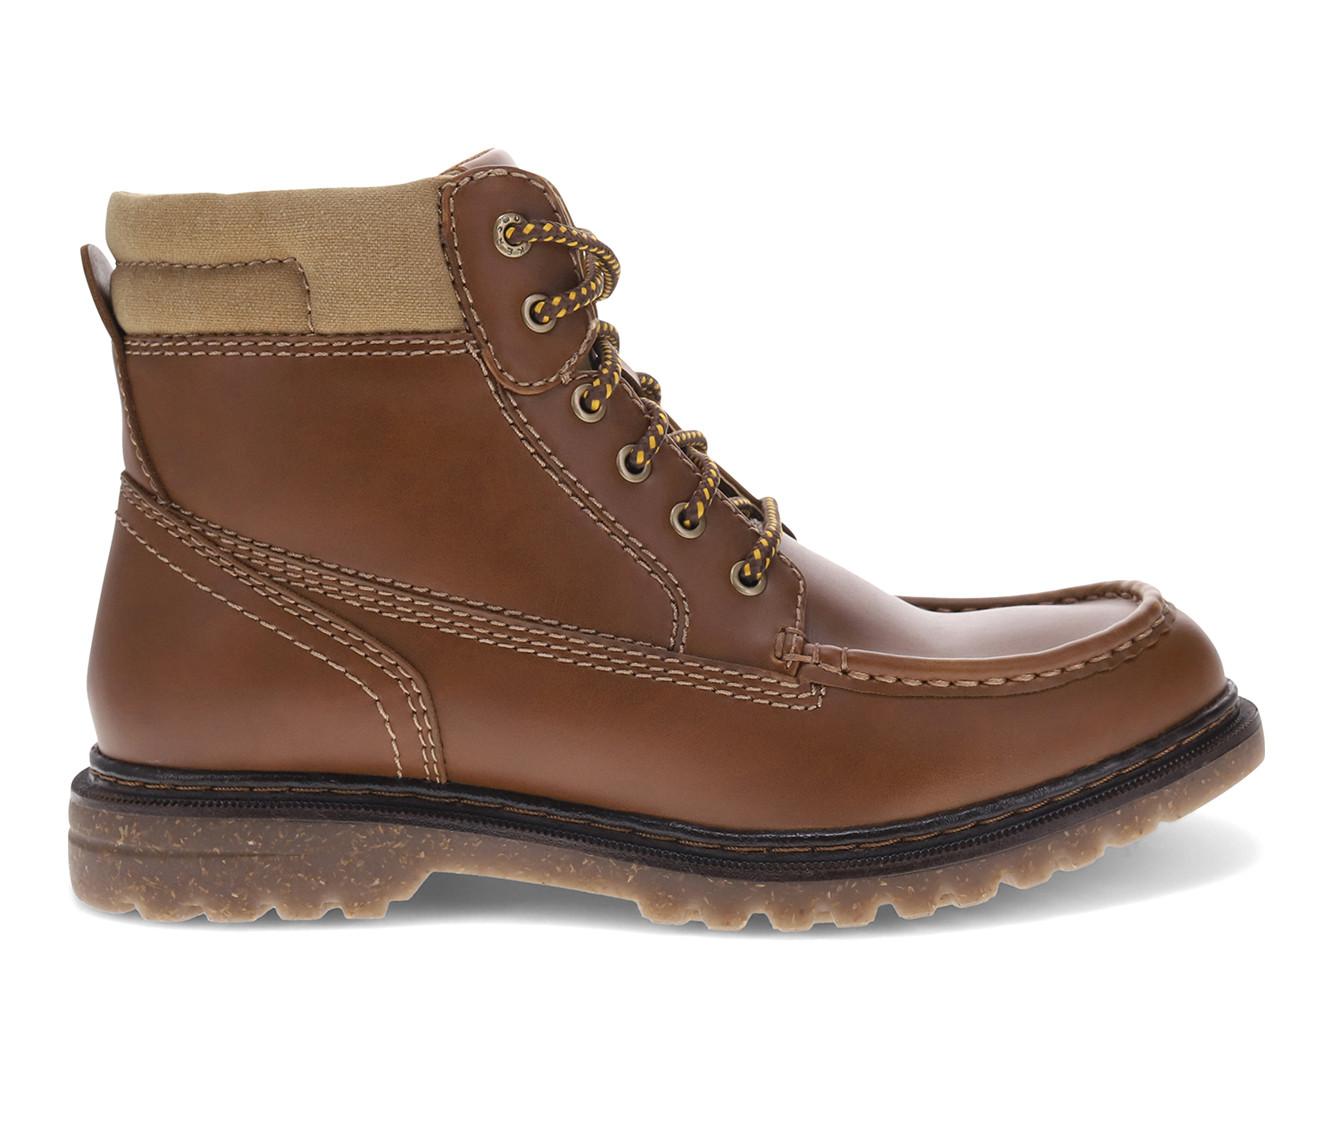 Men's Dockers Rockford Lace Up Boots